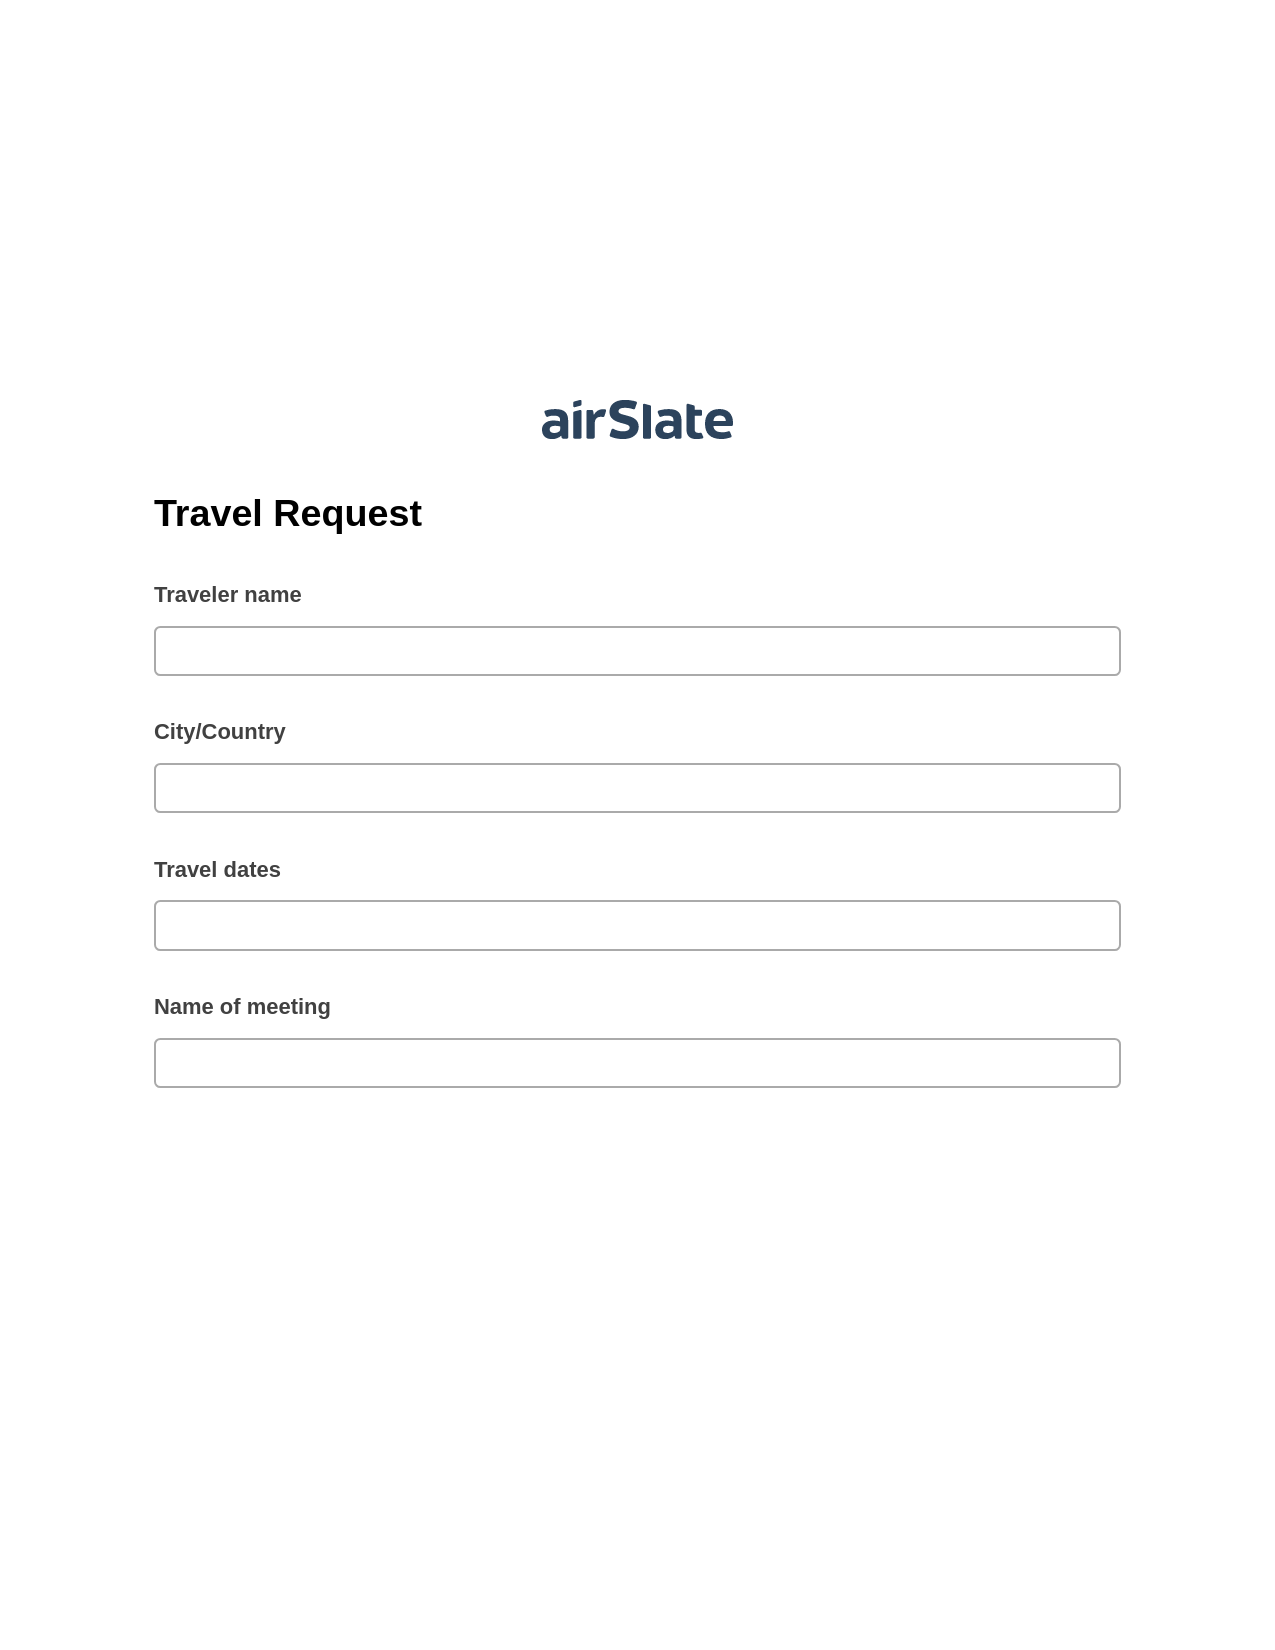 Travel Request Pre-fill from NetSuite Records Bot, Pre-fill with Custom Data Bot, Post-finish Document Bot